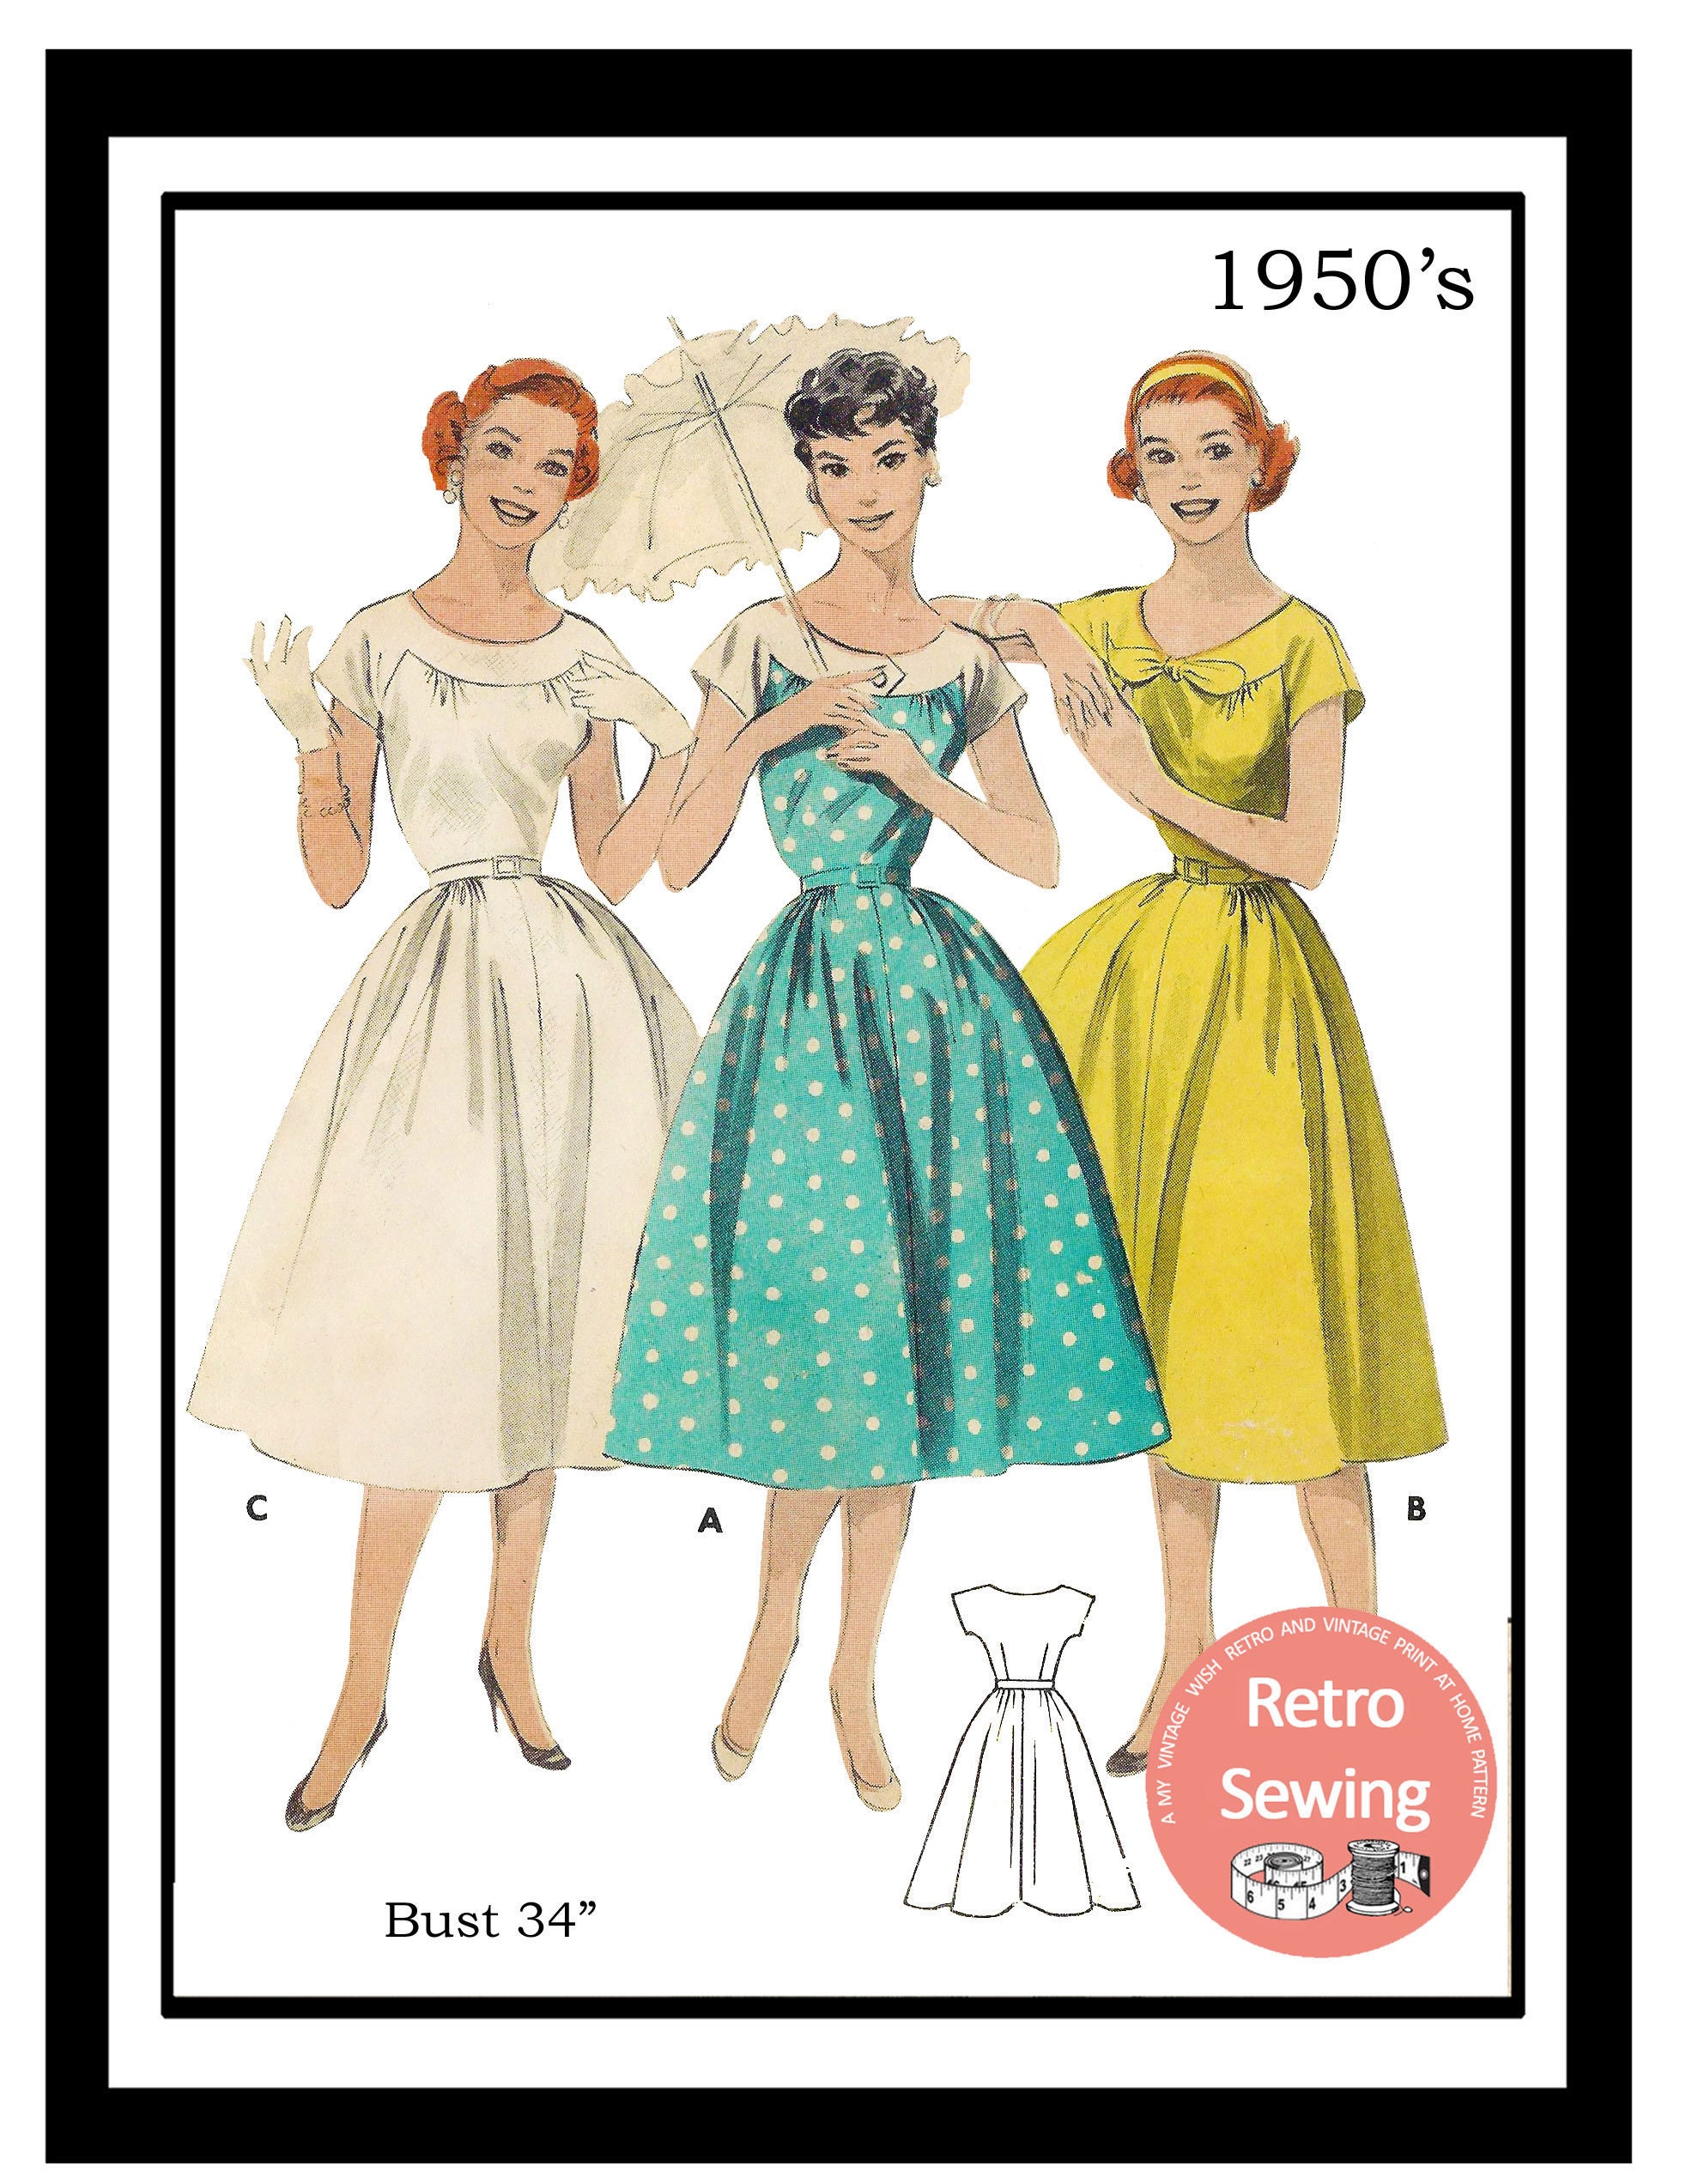  Simplicity Vintage Simplicity 1459 Vintage Fashion 1950's  Women's Dress Sewing Pattern, Sizes 16-24 : Arts, Crafts & Sewing